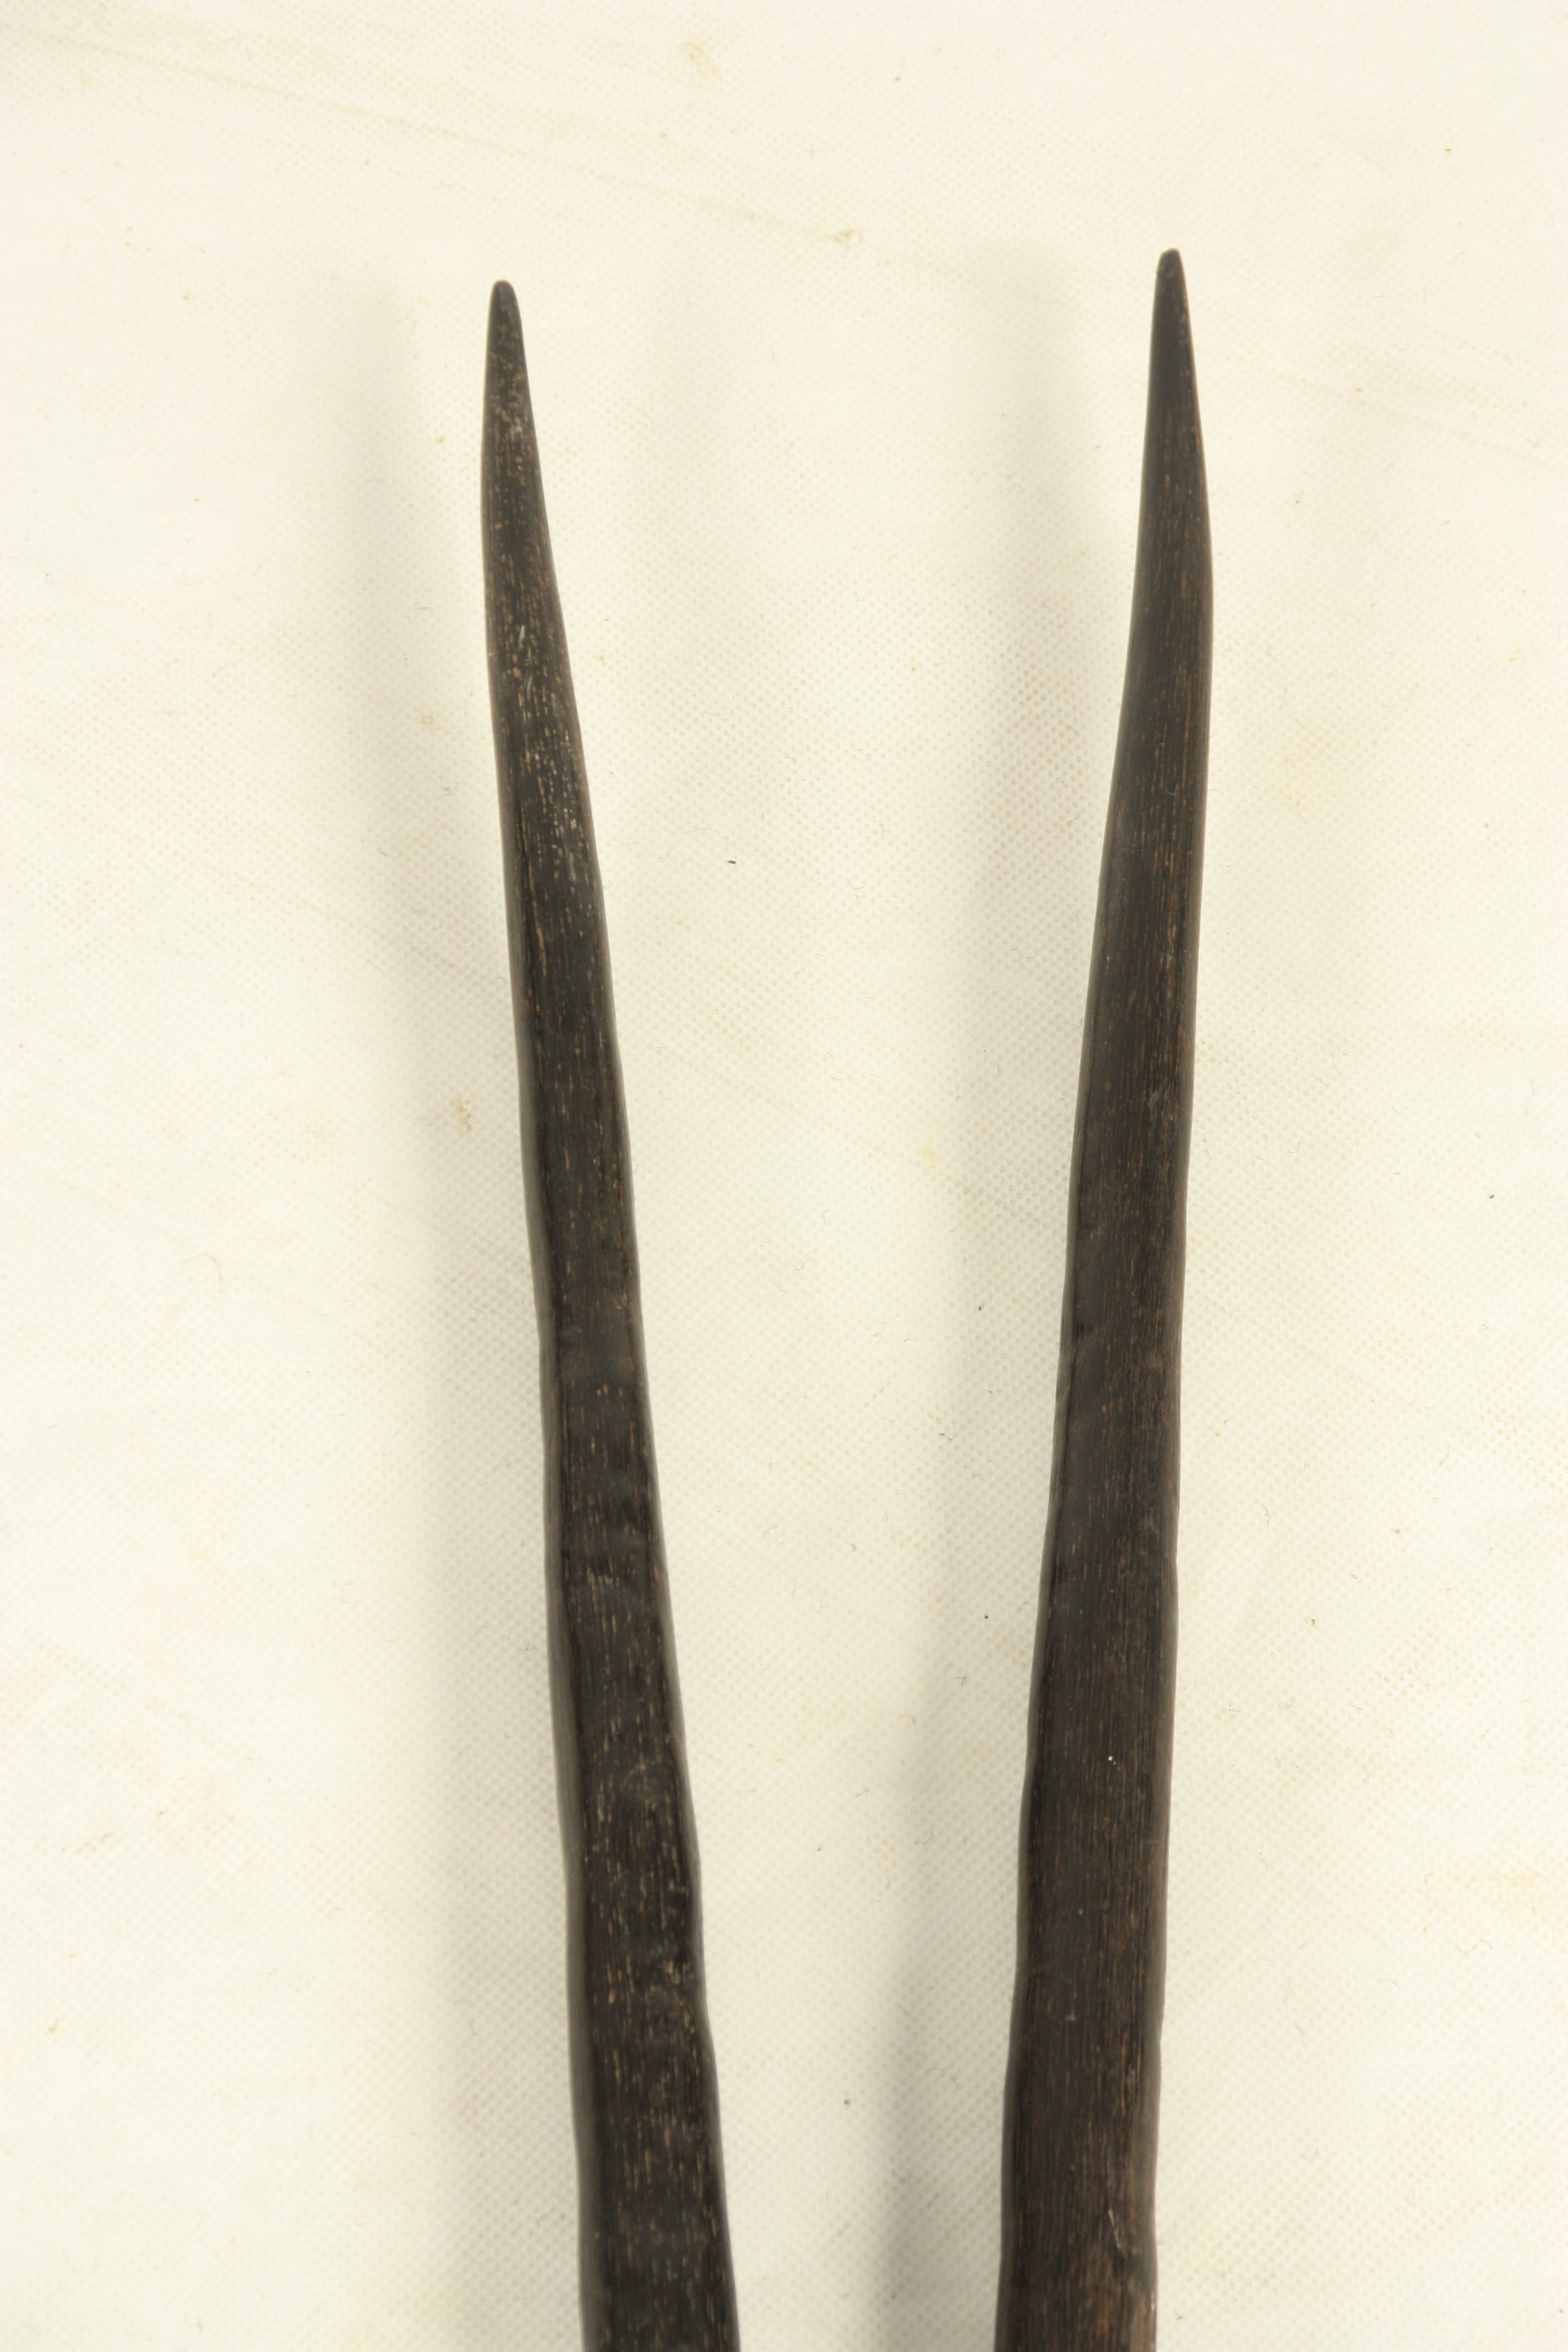 A LARGE PAIR OF 19TH CENTURY AFRICAN HORNS POSSIBLY OFF A GAZELLE 96cm overall - Image 3 of 3